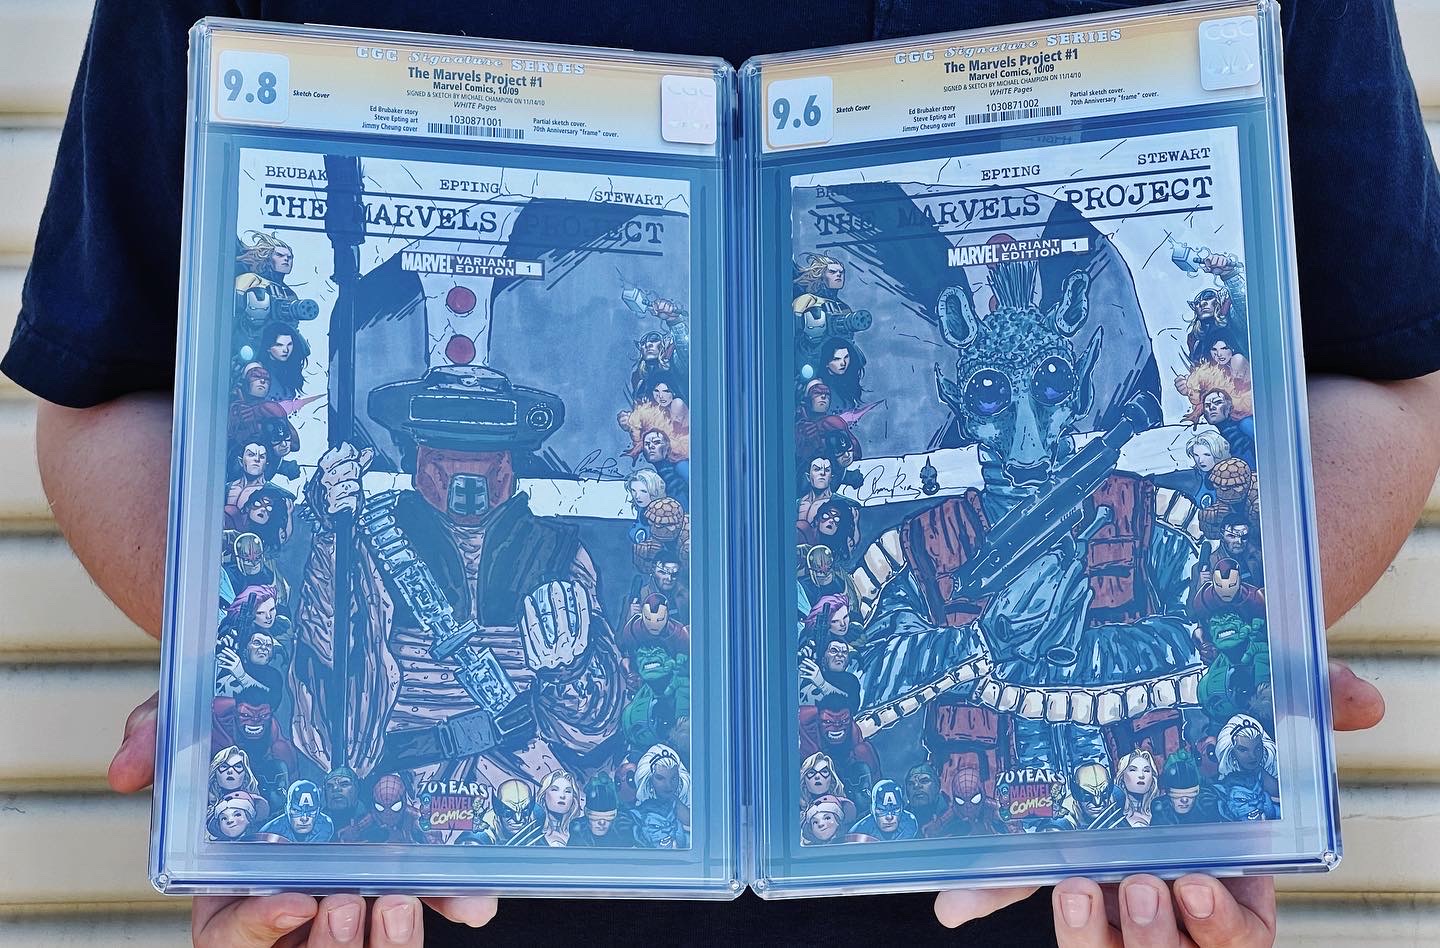 Two CGC graded sketch covers featuring Star Wars Bounty Hunters and a connecting backgorund.